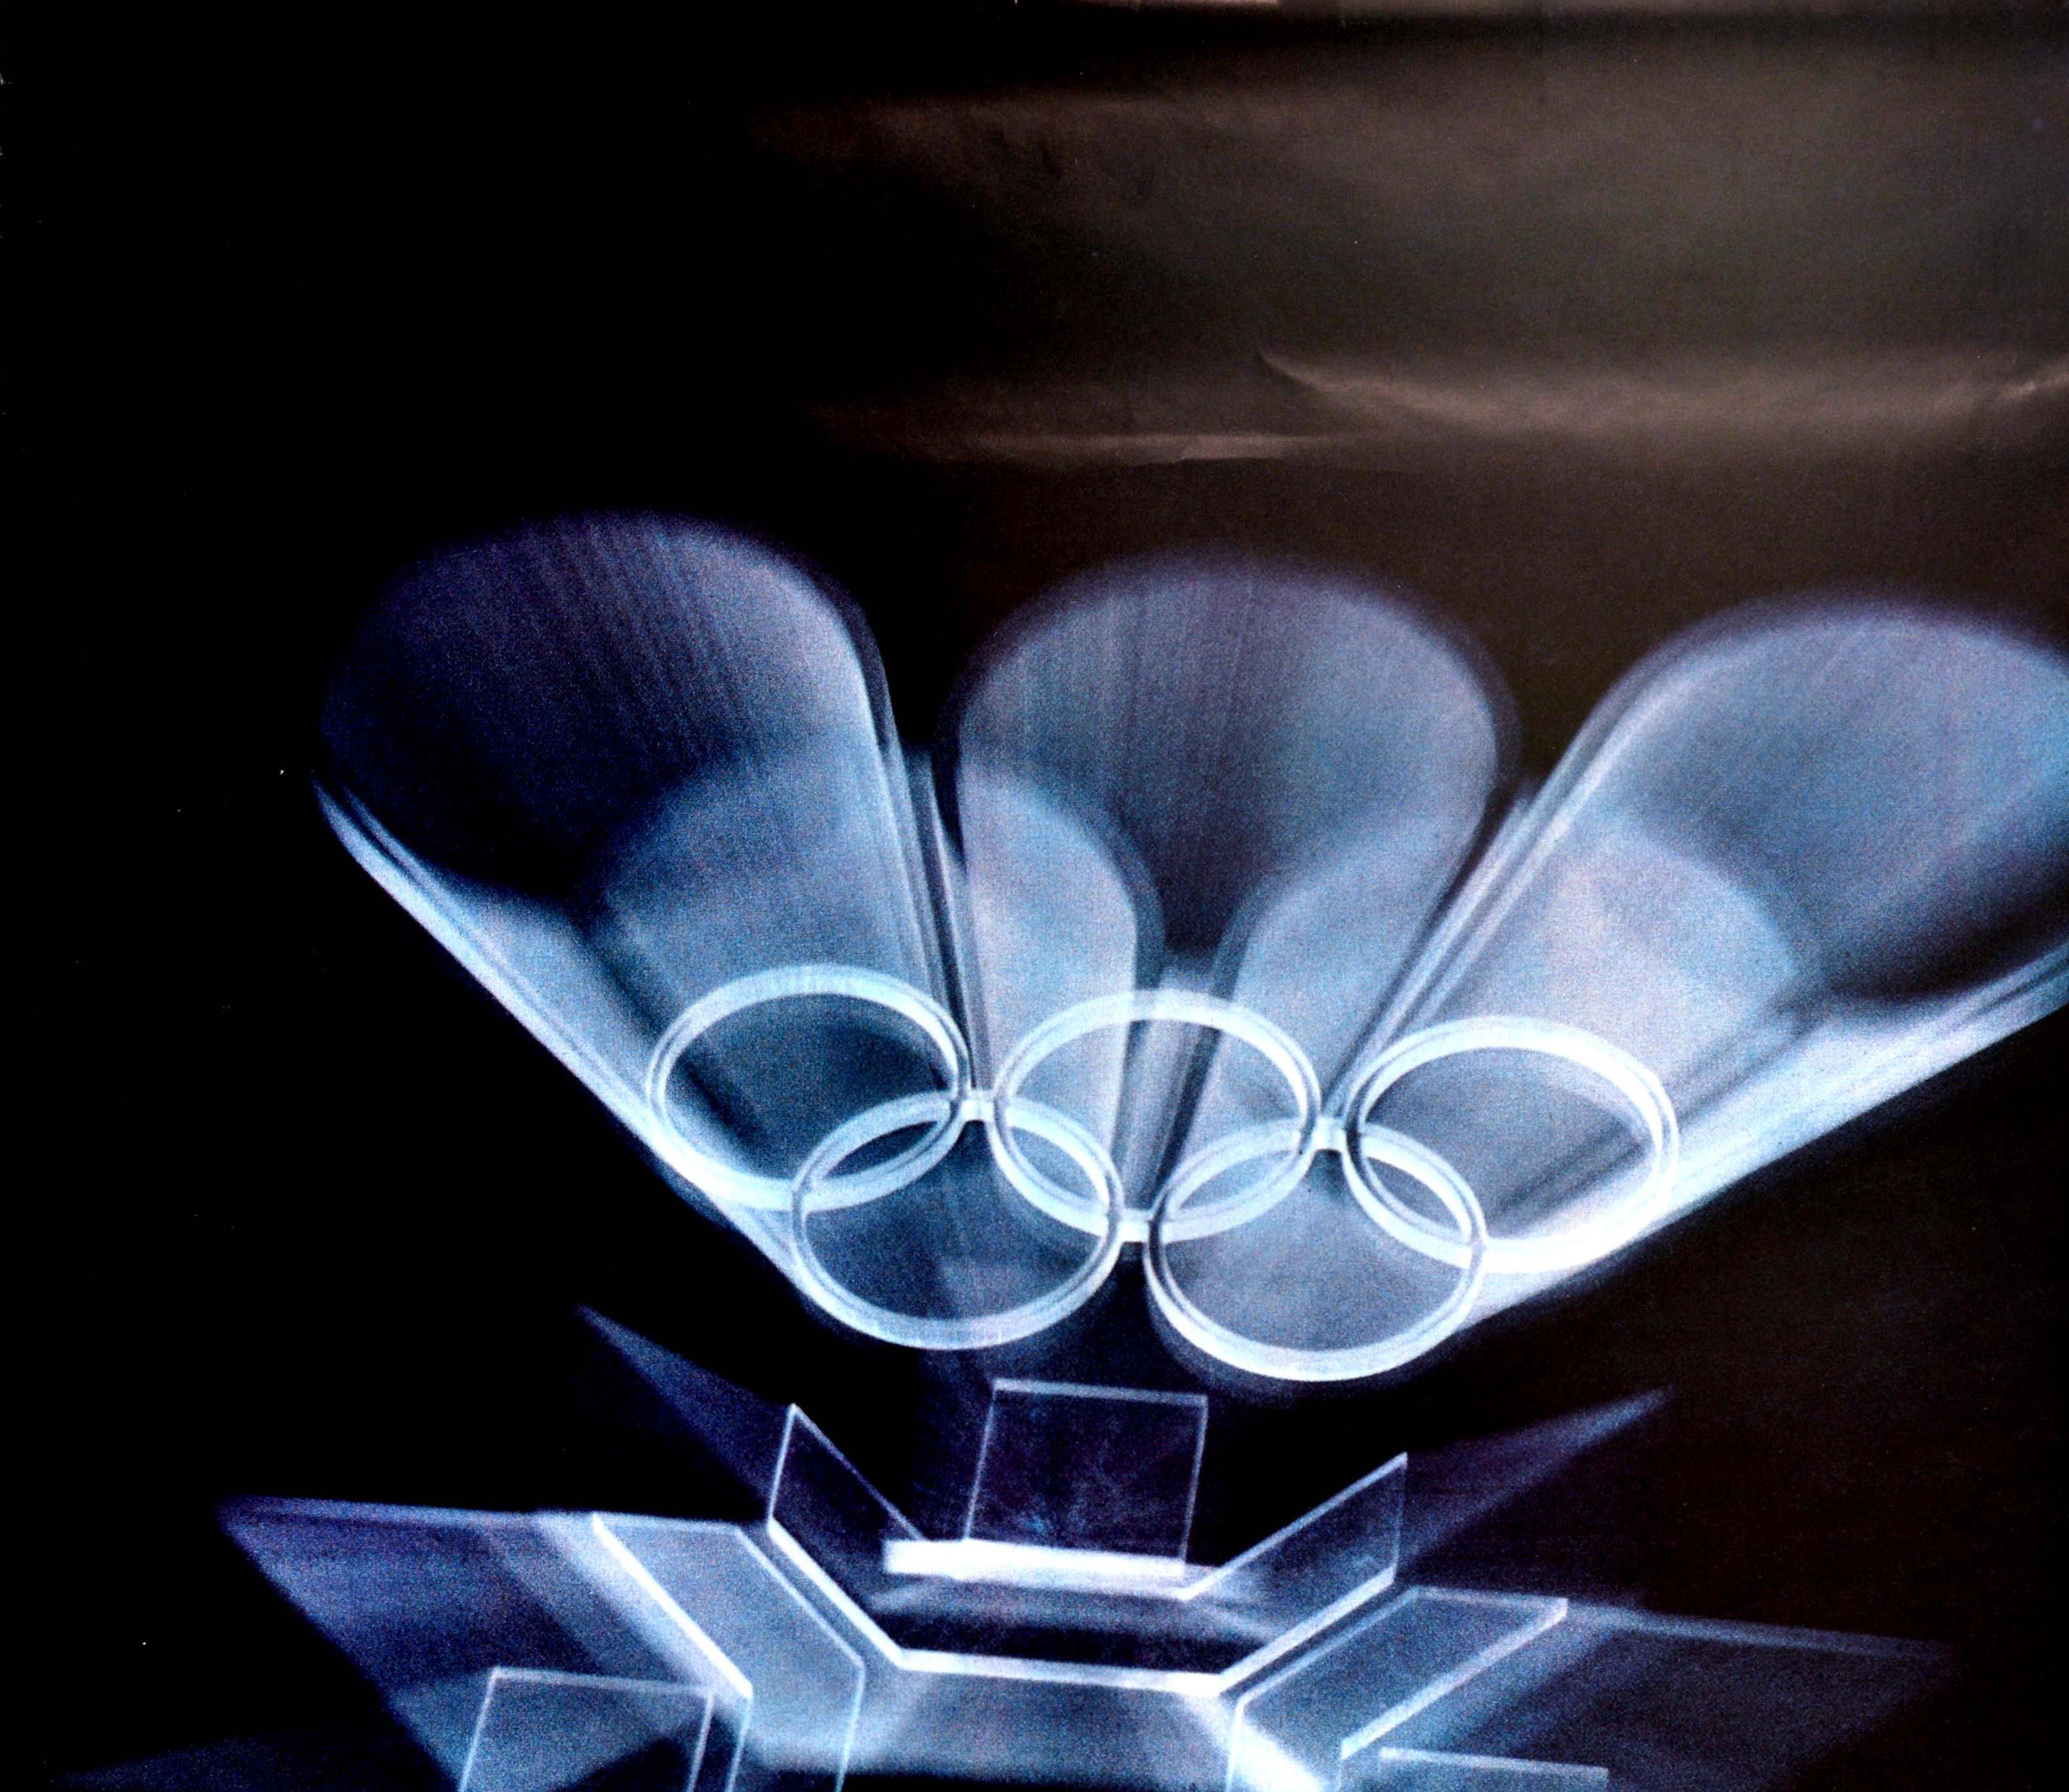 Original vintage winter sports poster for the XIV Olympic Winter Games Sarajevo 1984 Yugoslavia featuring a dynamic design of the Olympic Rings and 1984 Winter Olympics logo in silver shining on a black background, the emblem symbolising a stylised